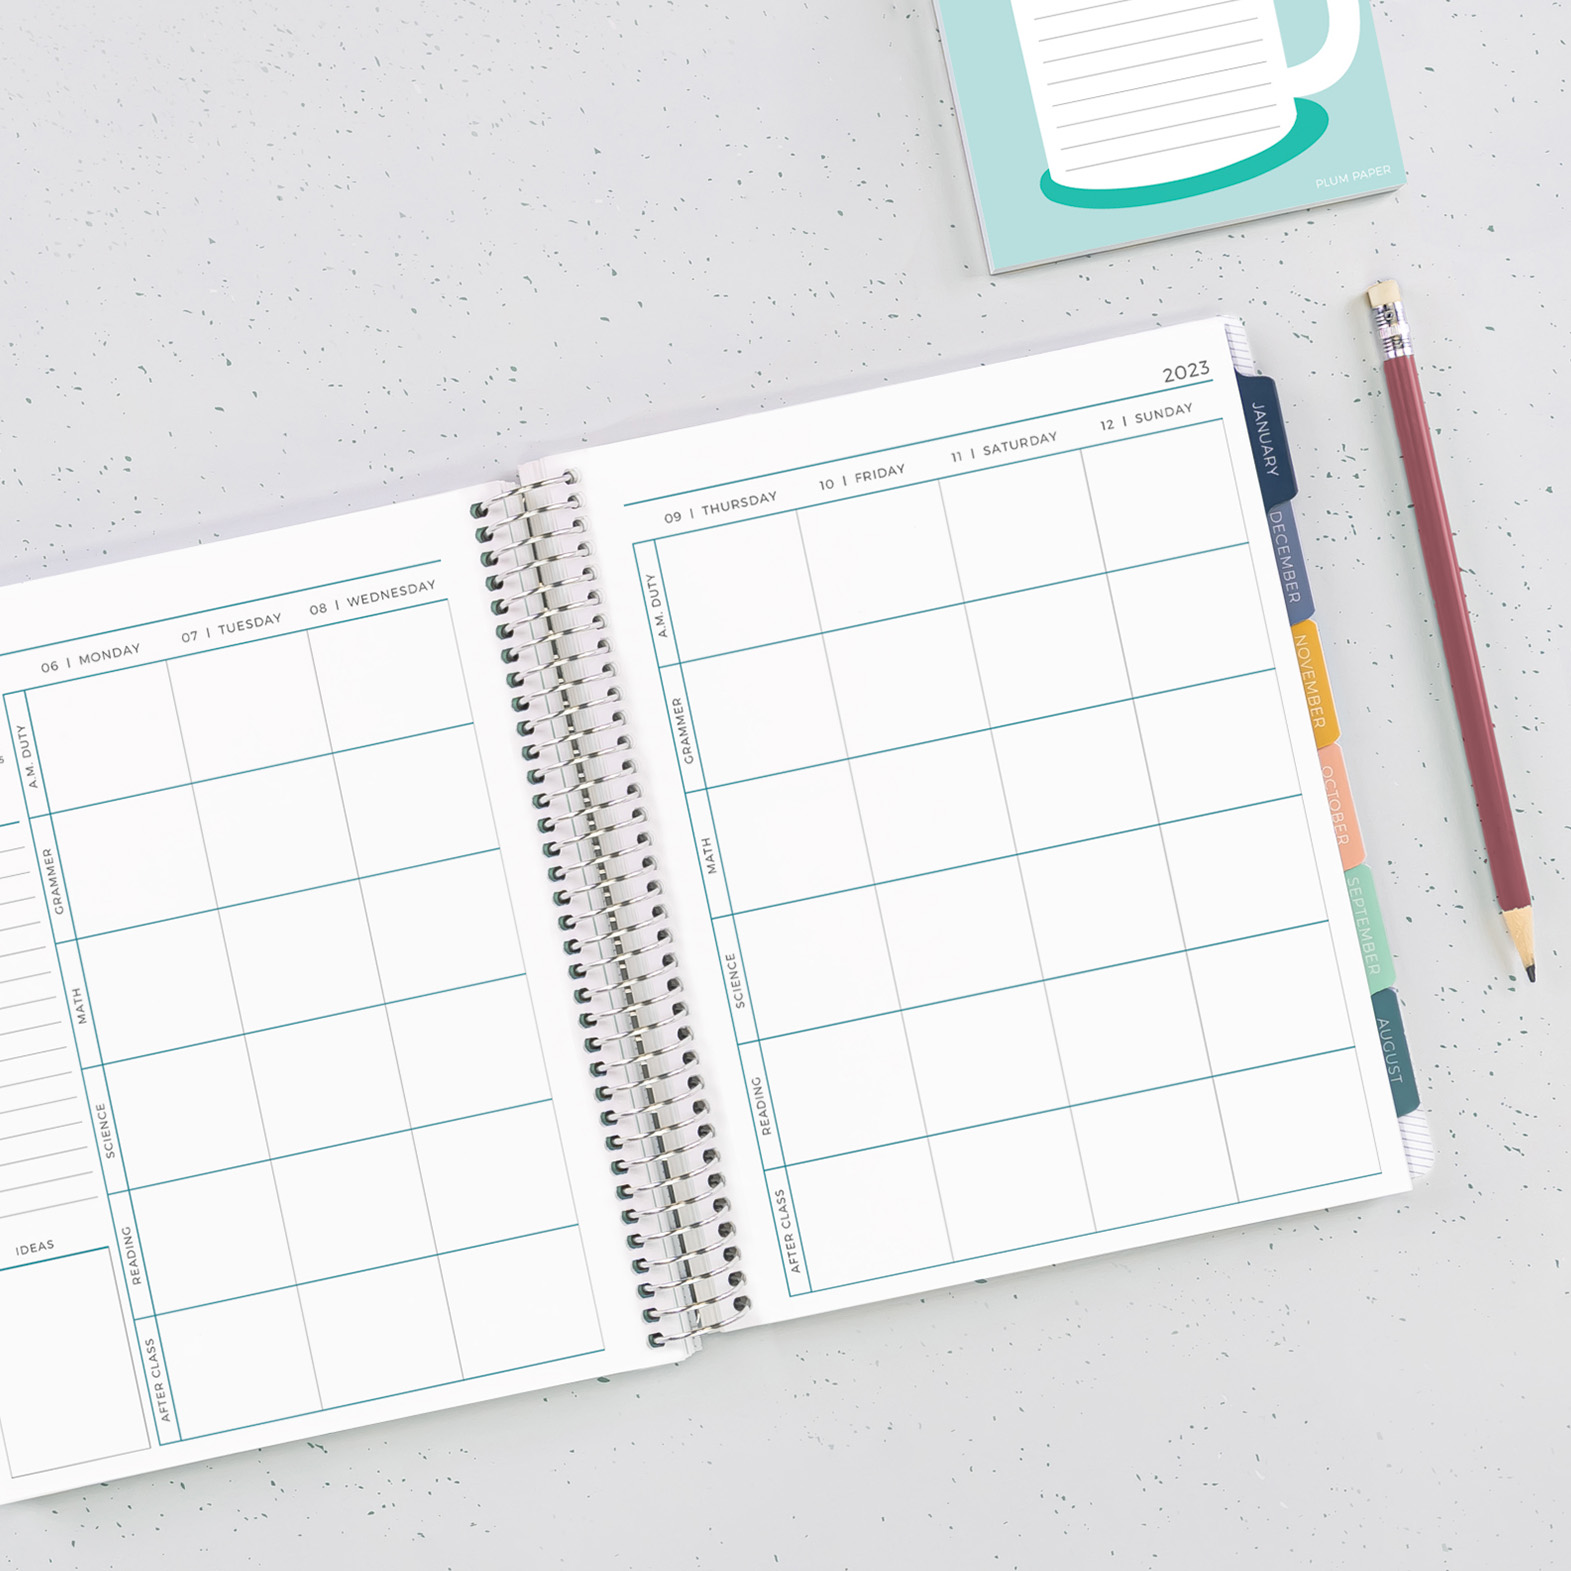 Weekly Teacher Planner with customized planner headers